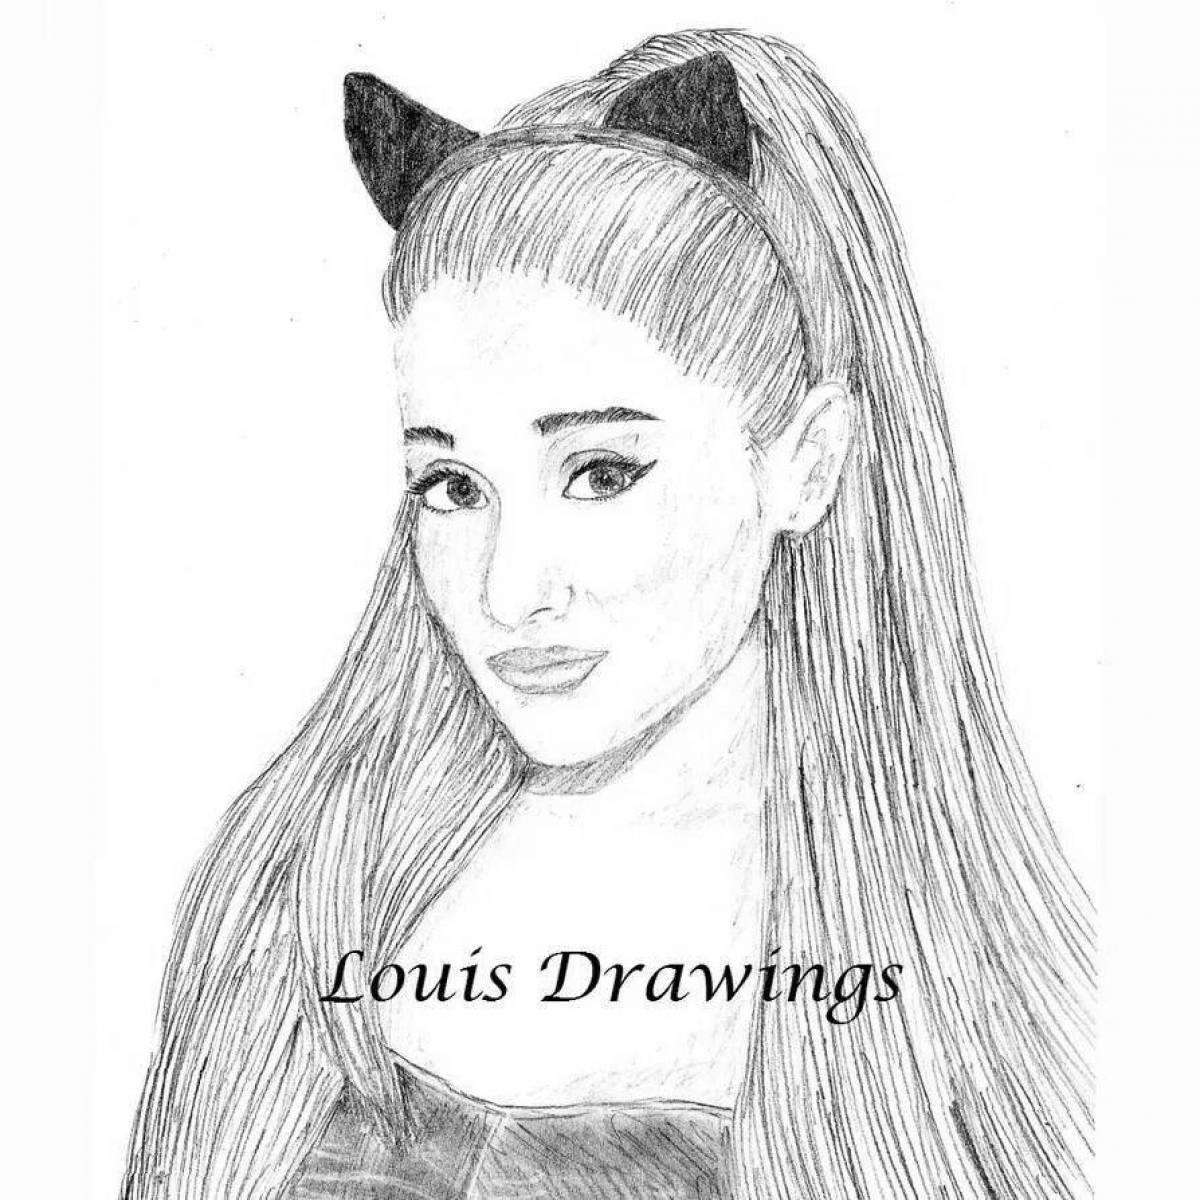 Ariana grande's amazing coloring page